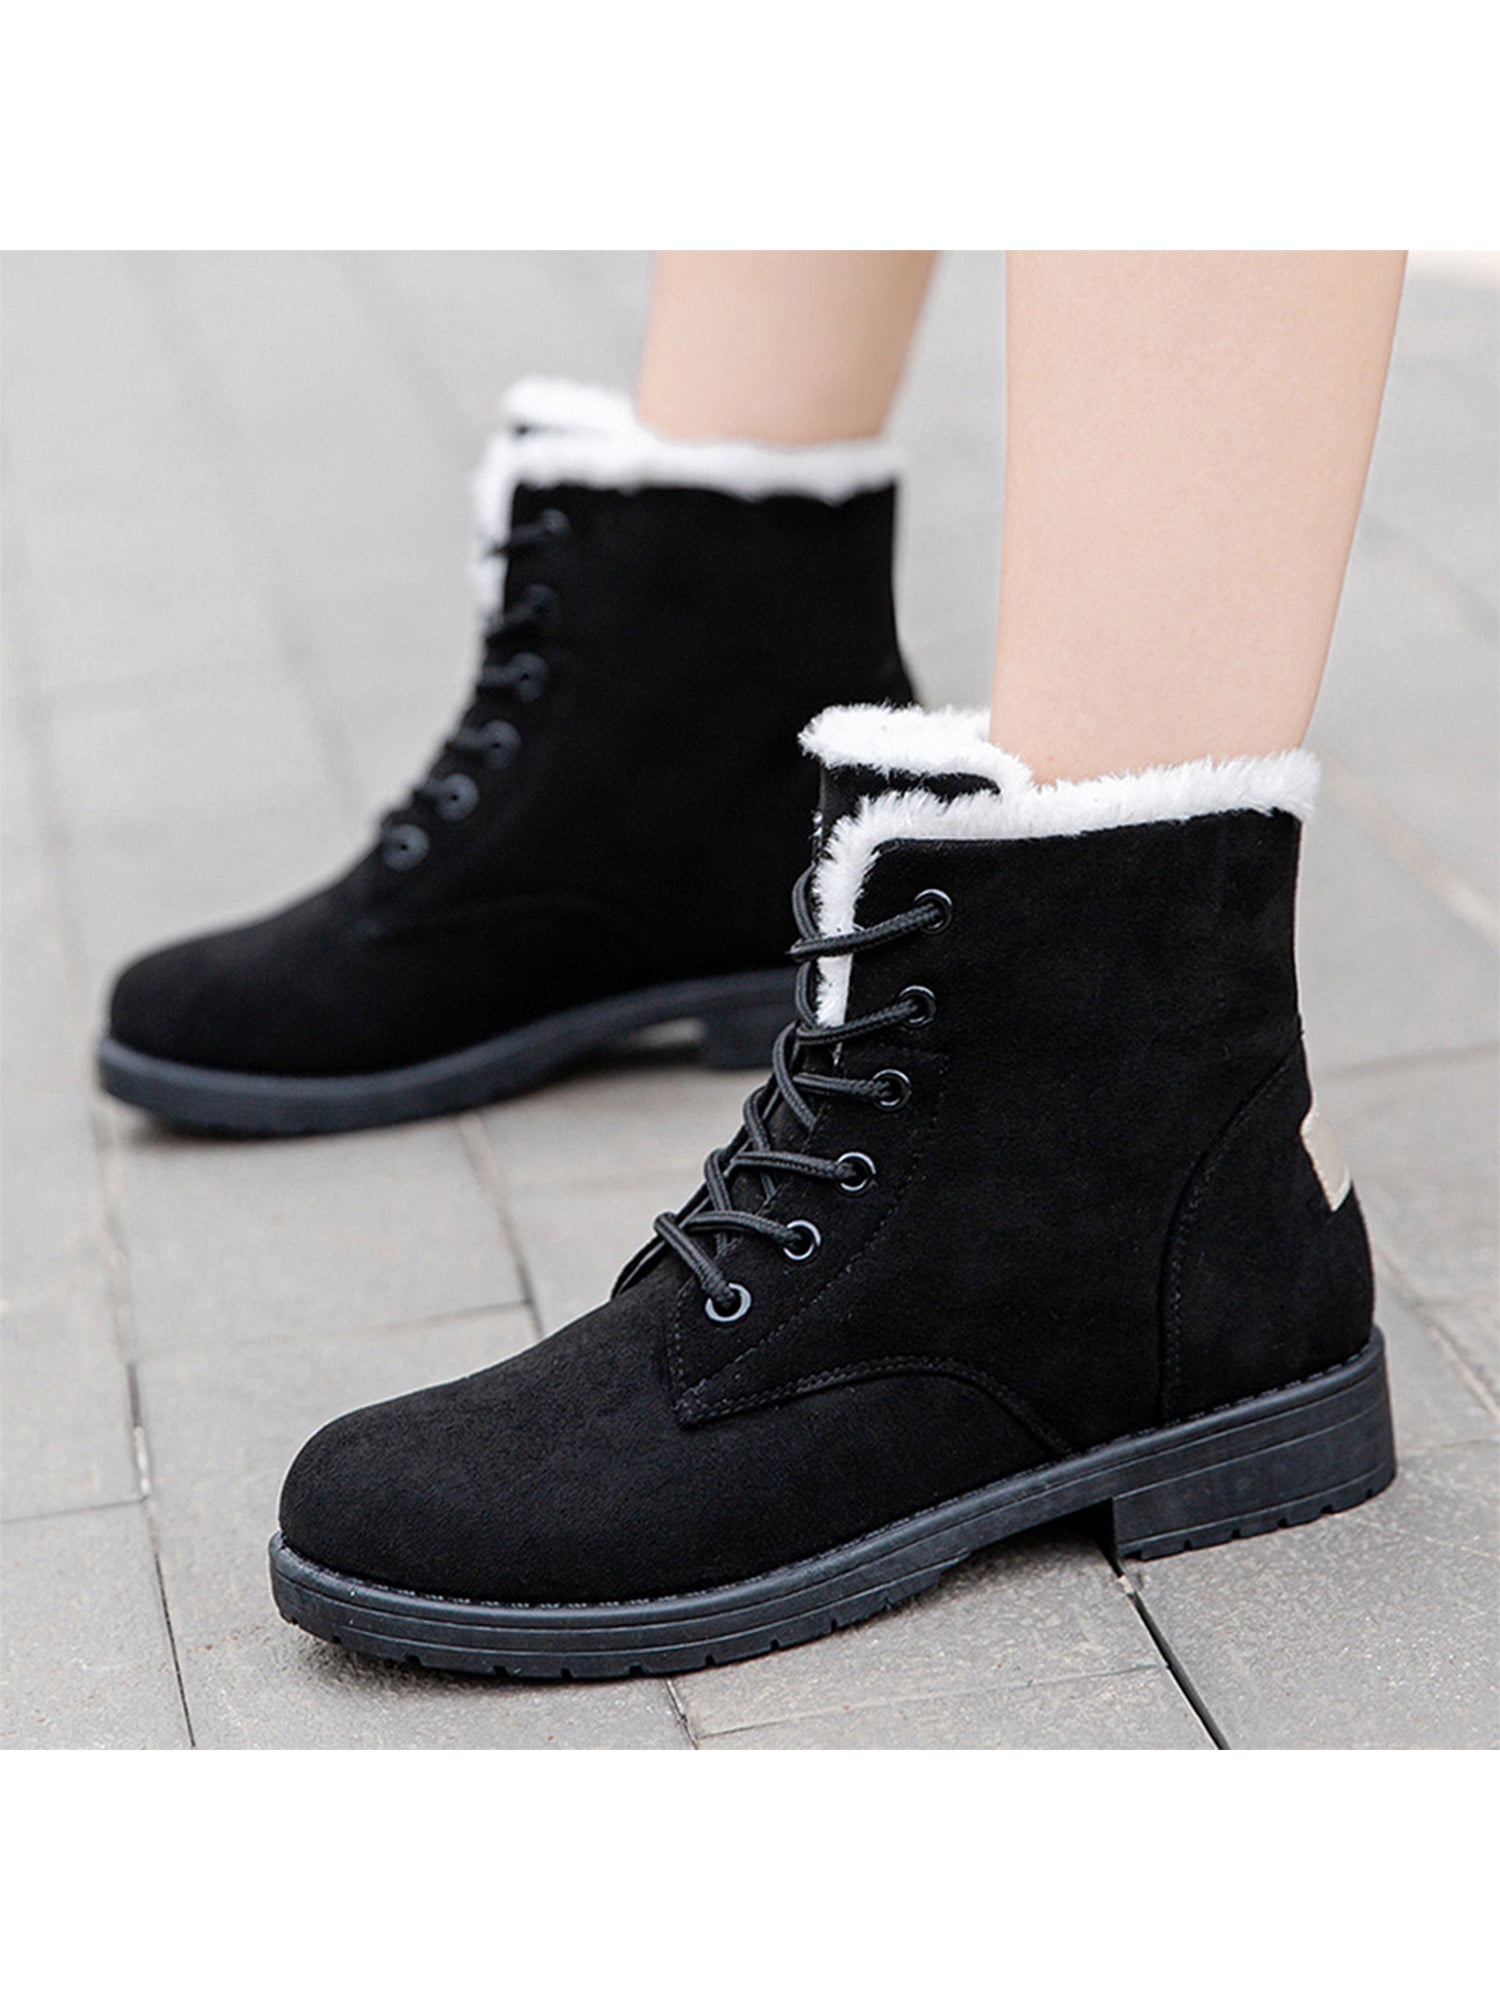 Winter Women Snow Boot Flat Suede Thick Plush Fur Warm Black Red Lace Outdoor Female Warm Short Boots 